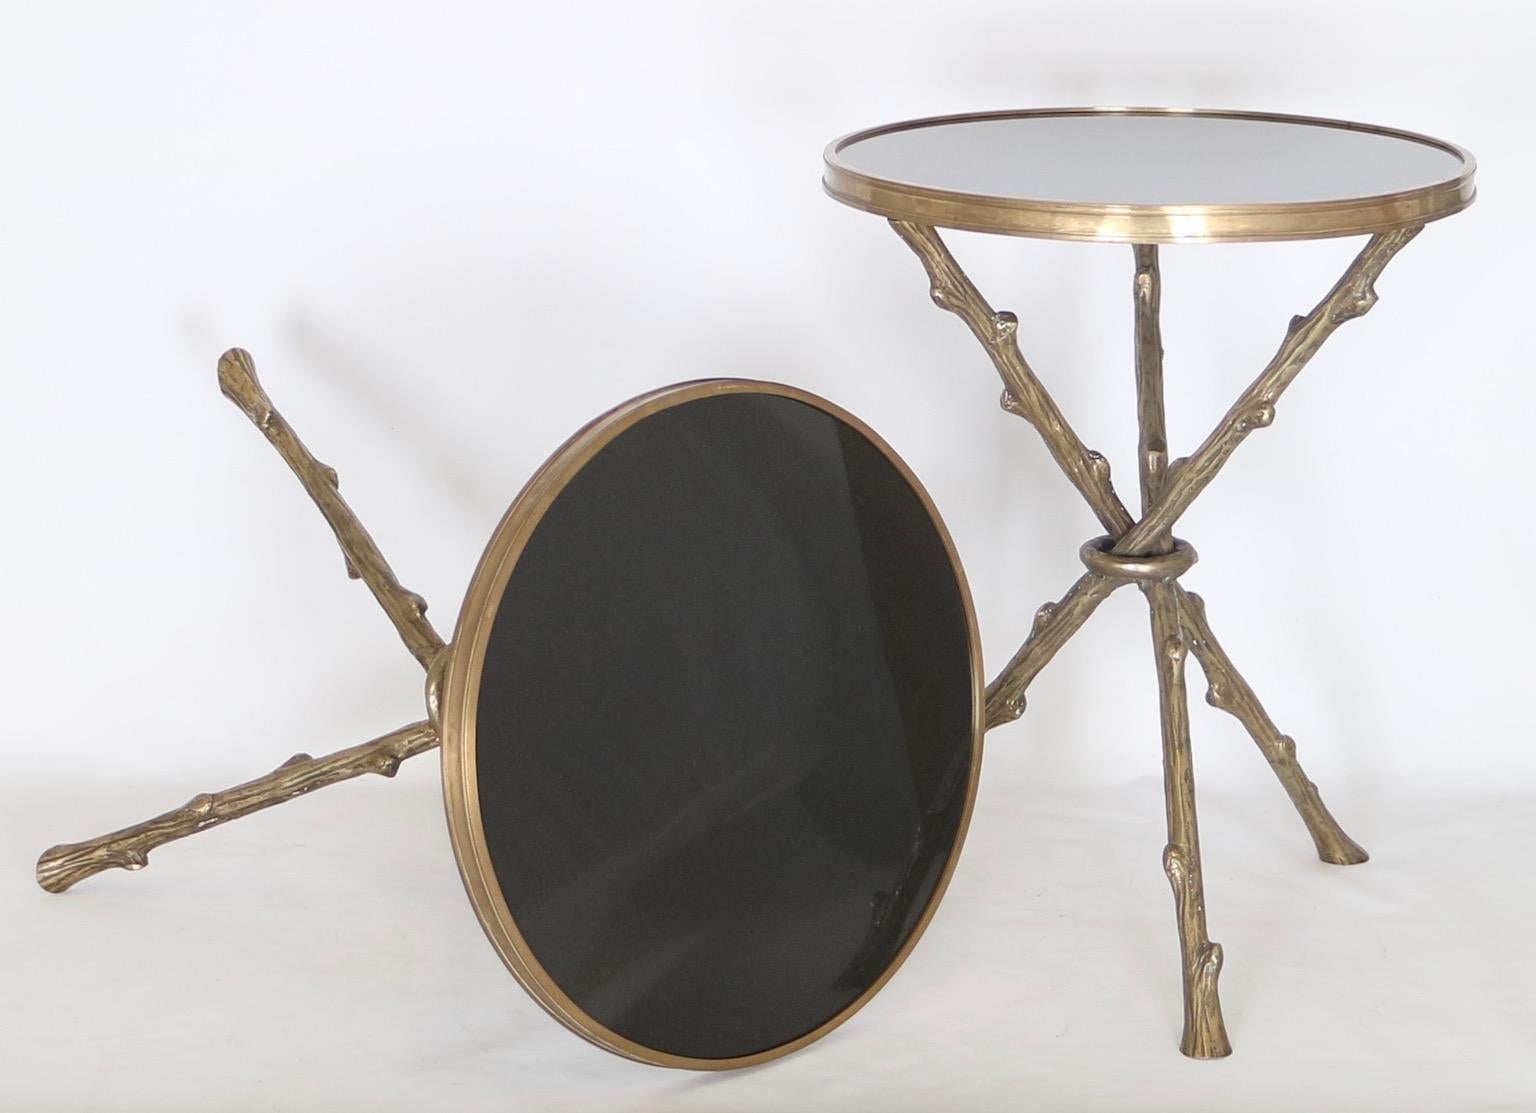 French Hollywood Regency faux bamboo side tables in the style of Maison Baguès.

Has a bronze faux branch tripod base with a round black granite top.

These side tables are in excellent vintage condition and have wear consistent with age and use.
 